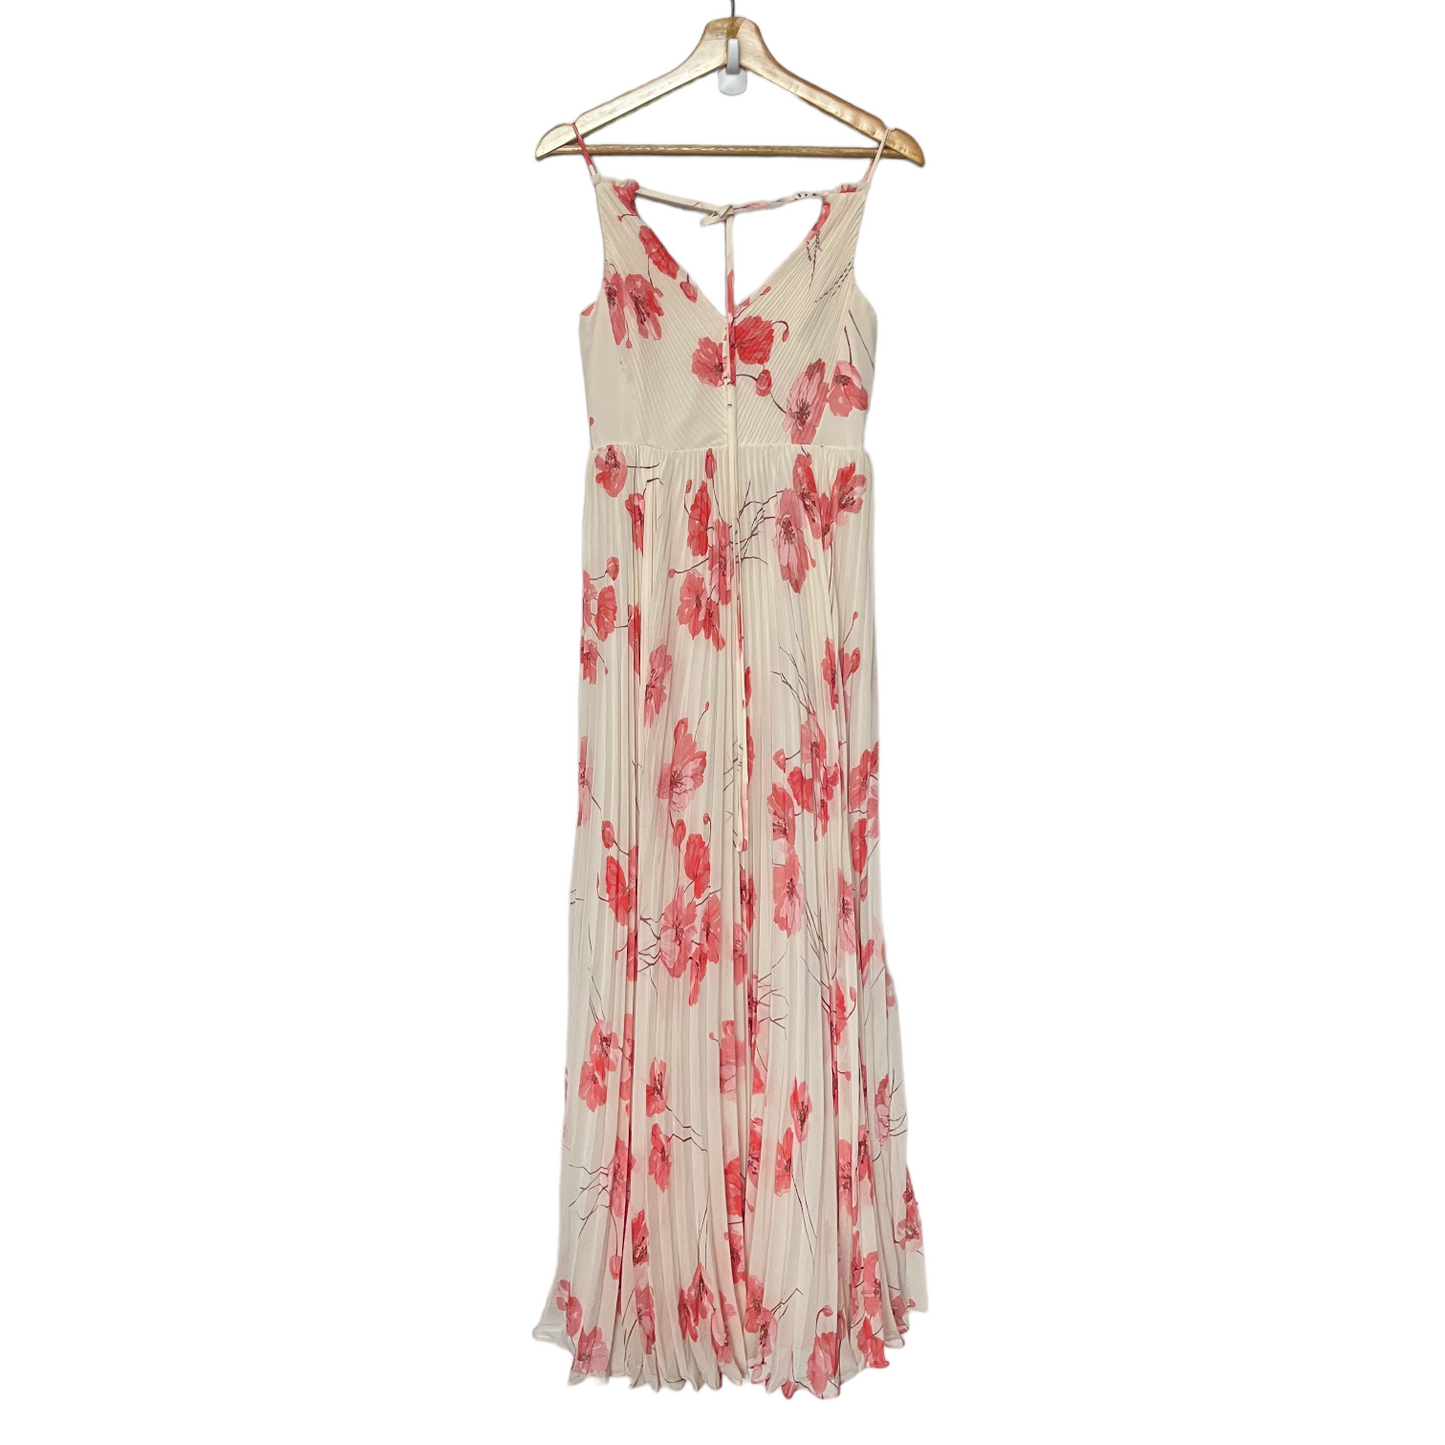 BCBGMAXAZRIA Tossed Poppies Maxi Dress in Sheer Pink Combo